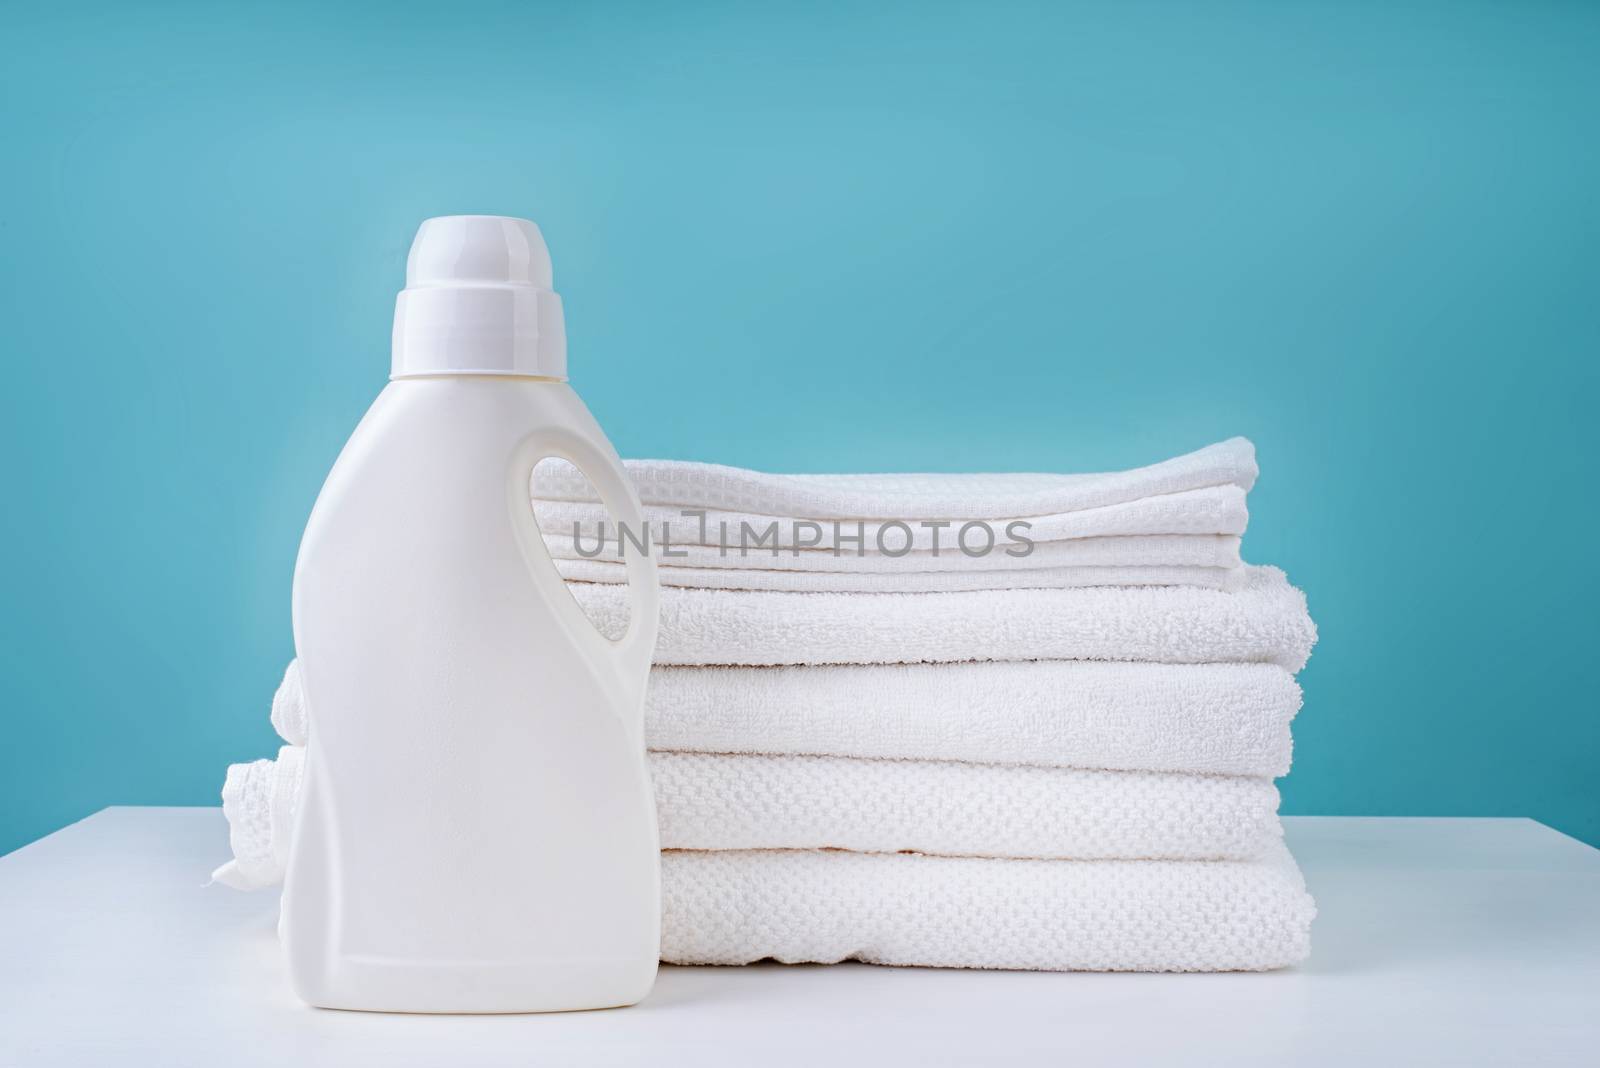 stack of clean white towels and a bottle of detergent on blue background by Desperada